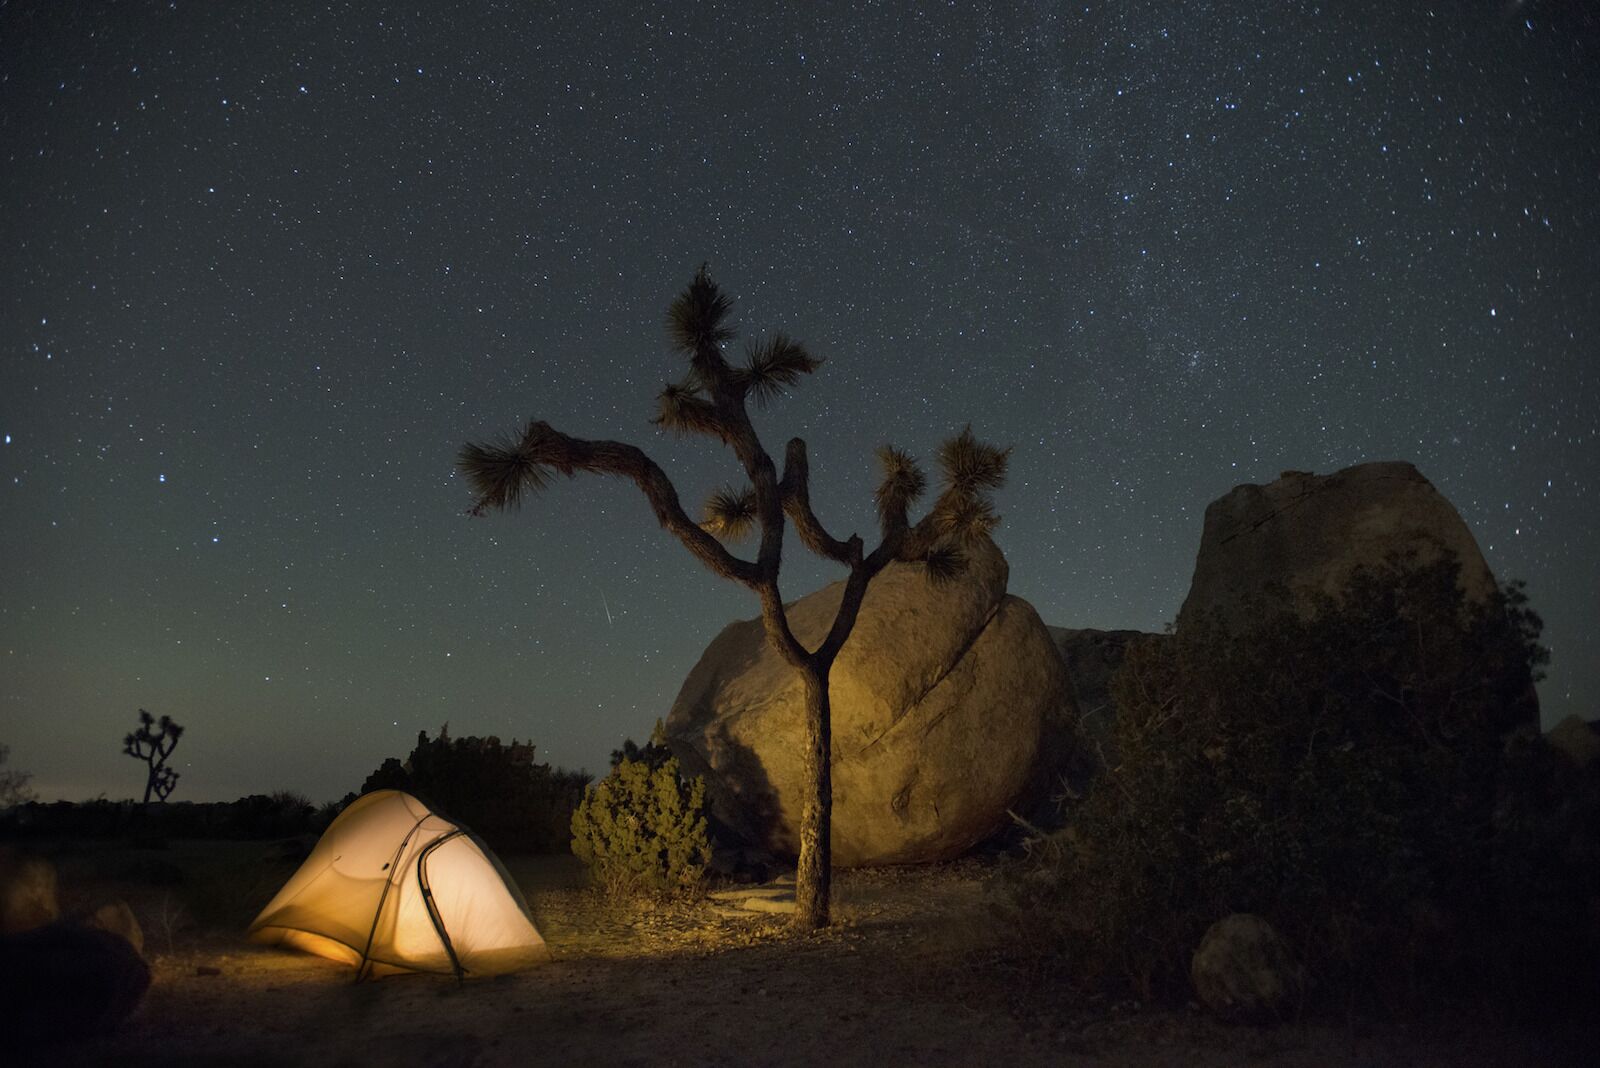 A starry skyframes this night view of Joshua trees and a campground tent at Joshua Tree National Park, California.